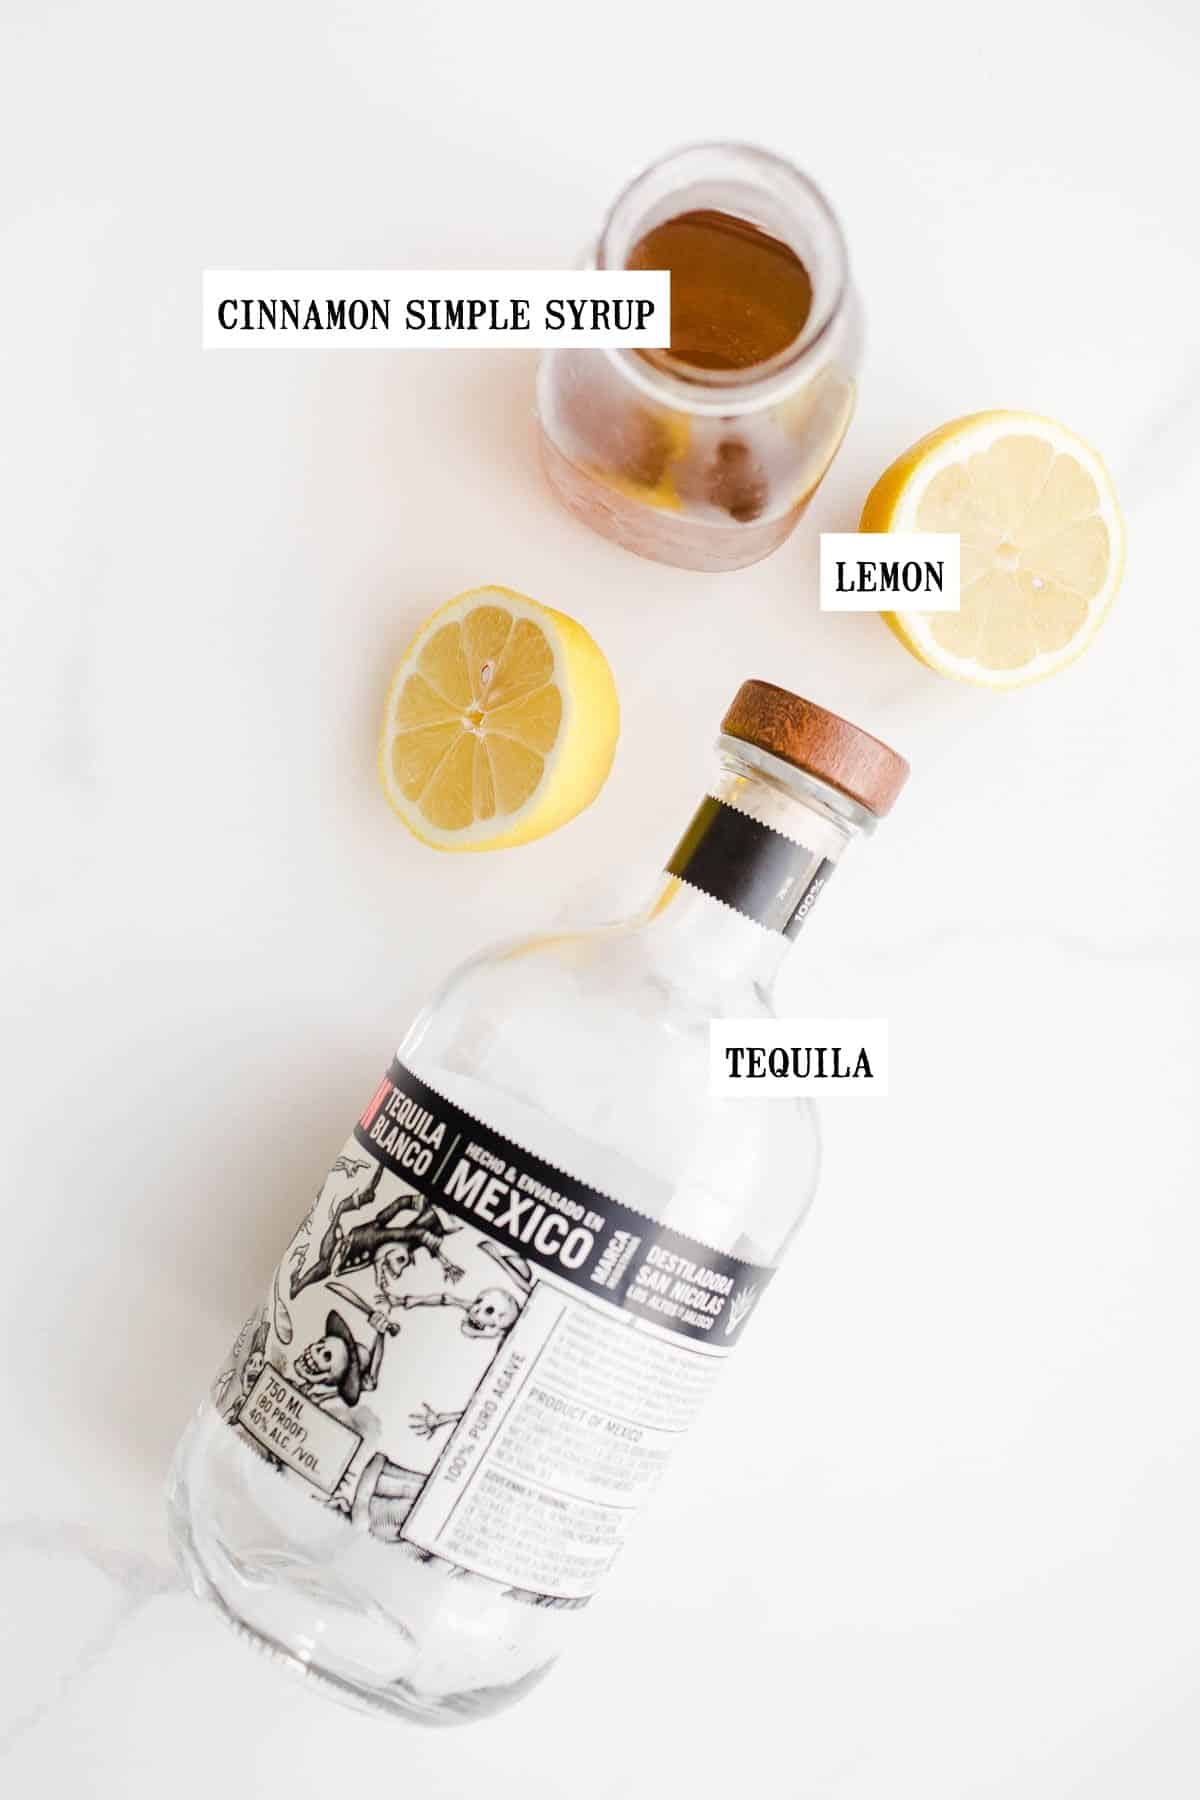 A tequila bottle, lemon, and simple syrup on a white surface. 